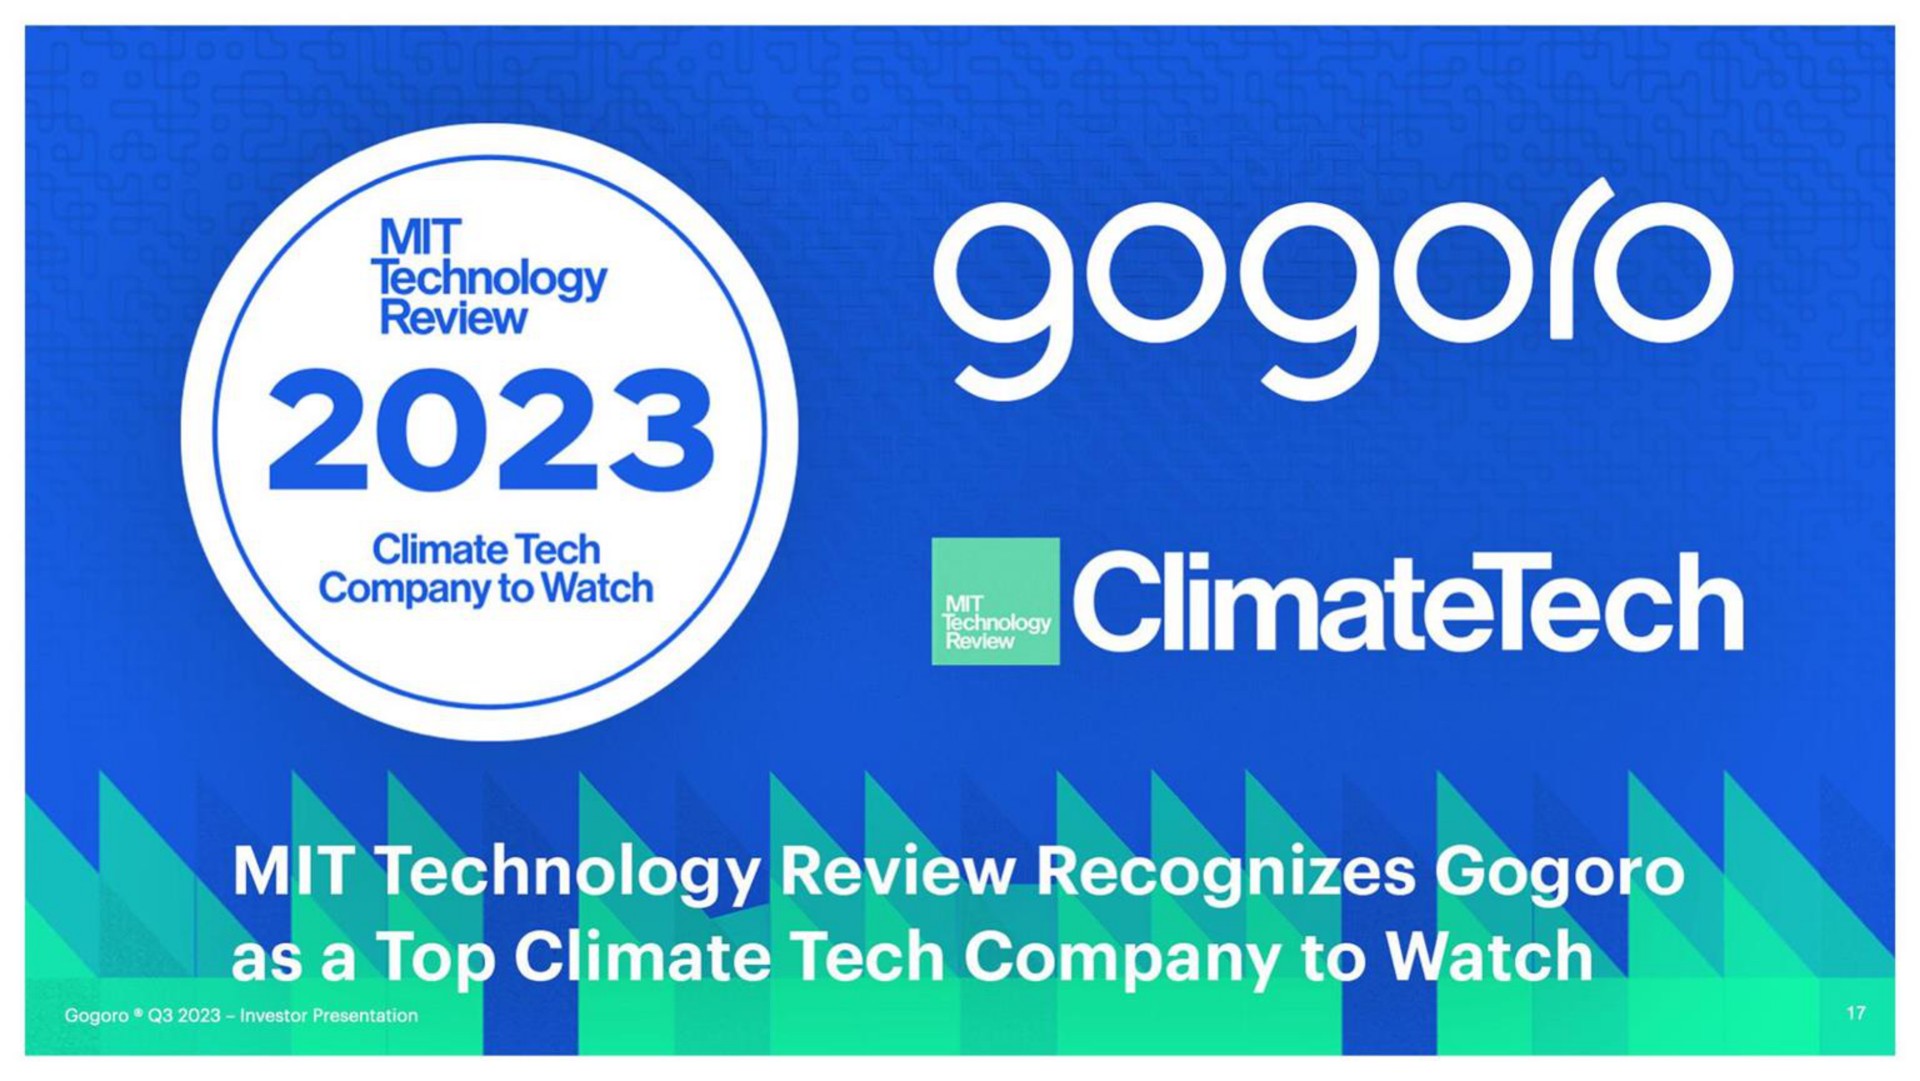 technology review recognizes as a top climate tech company to watch | Gogoro